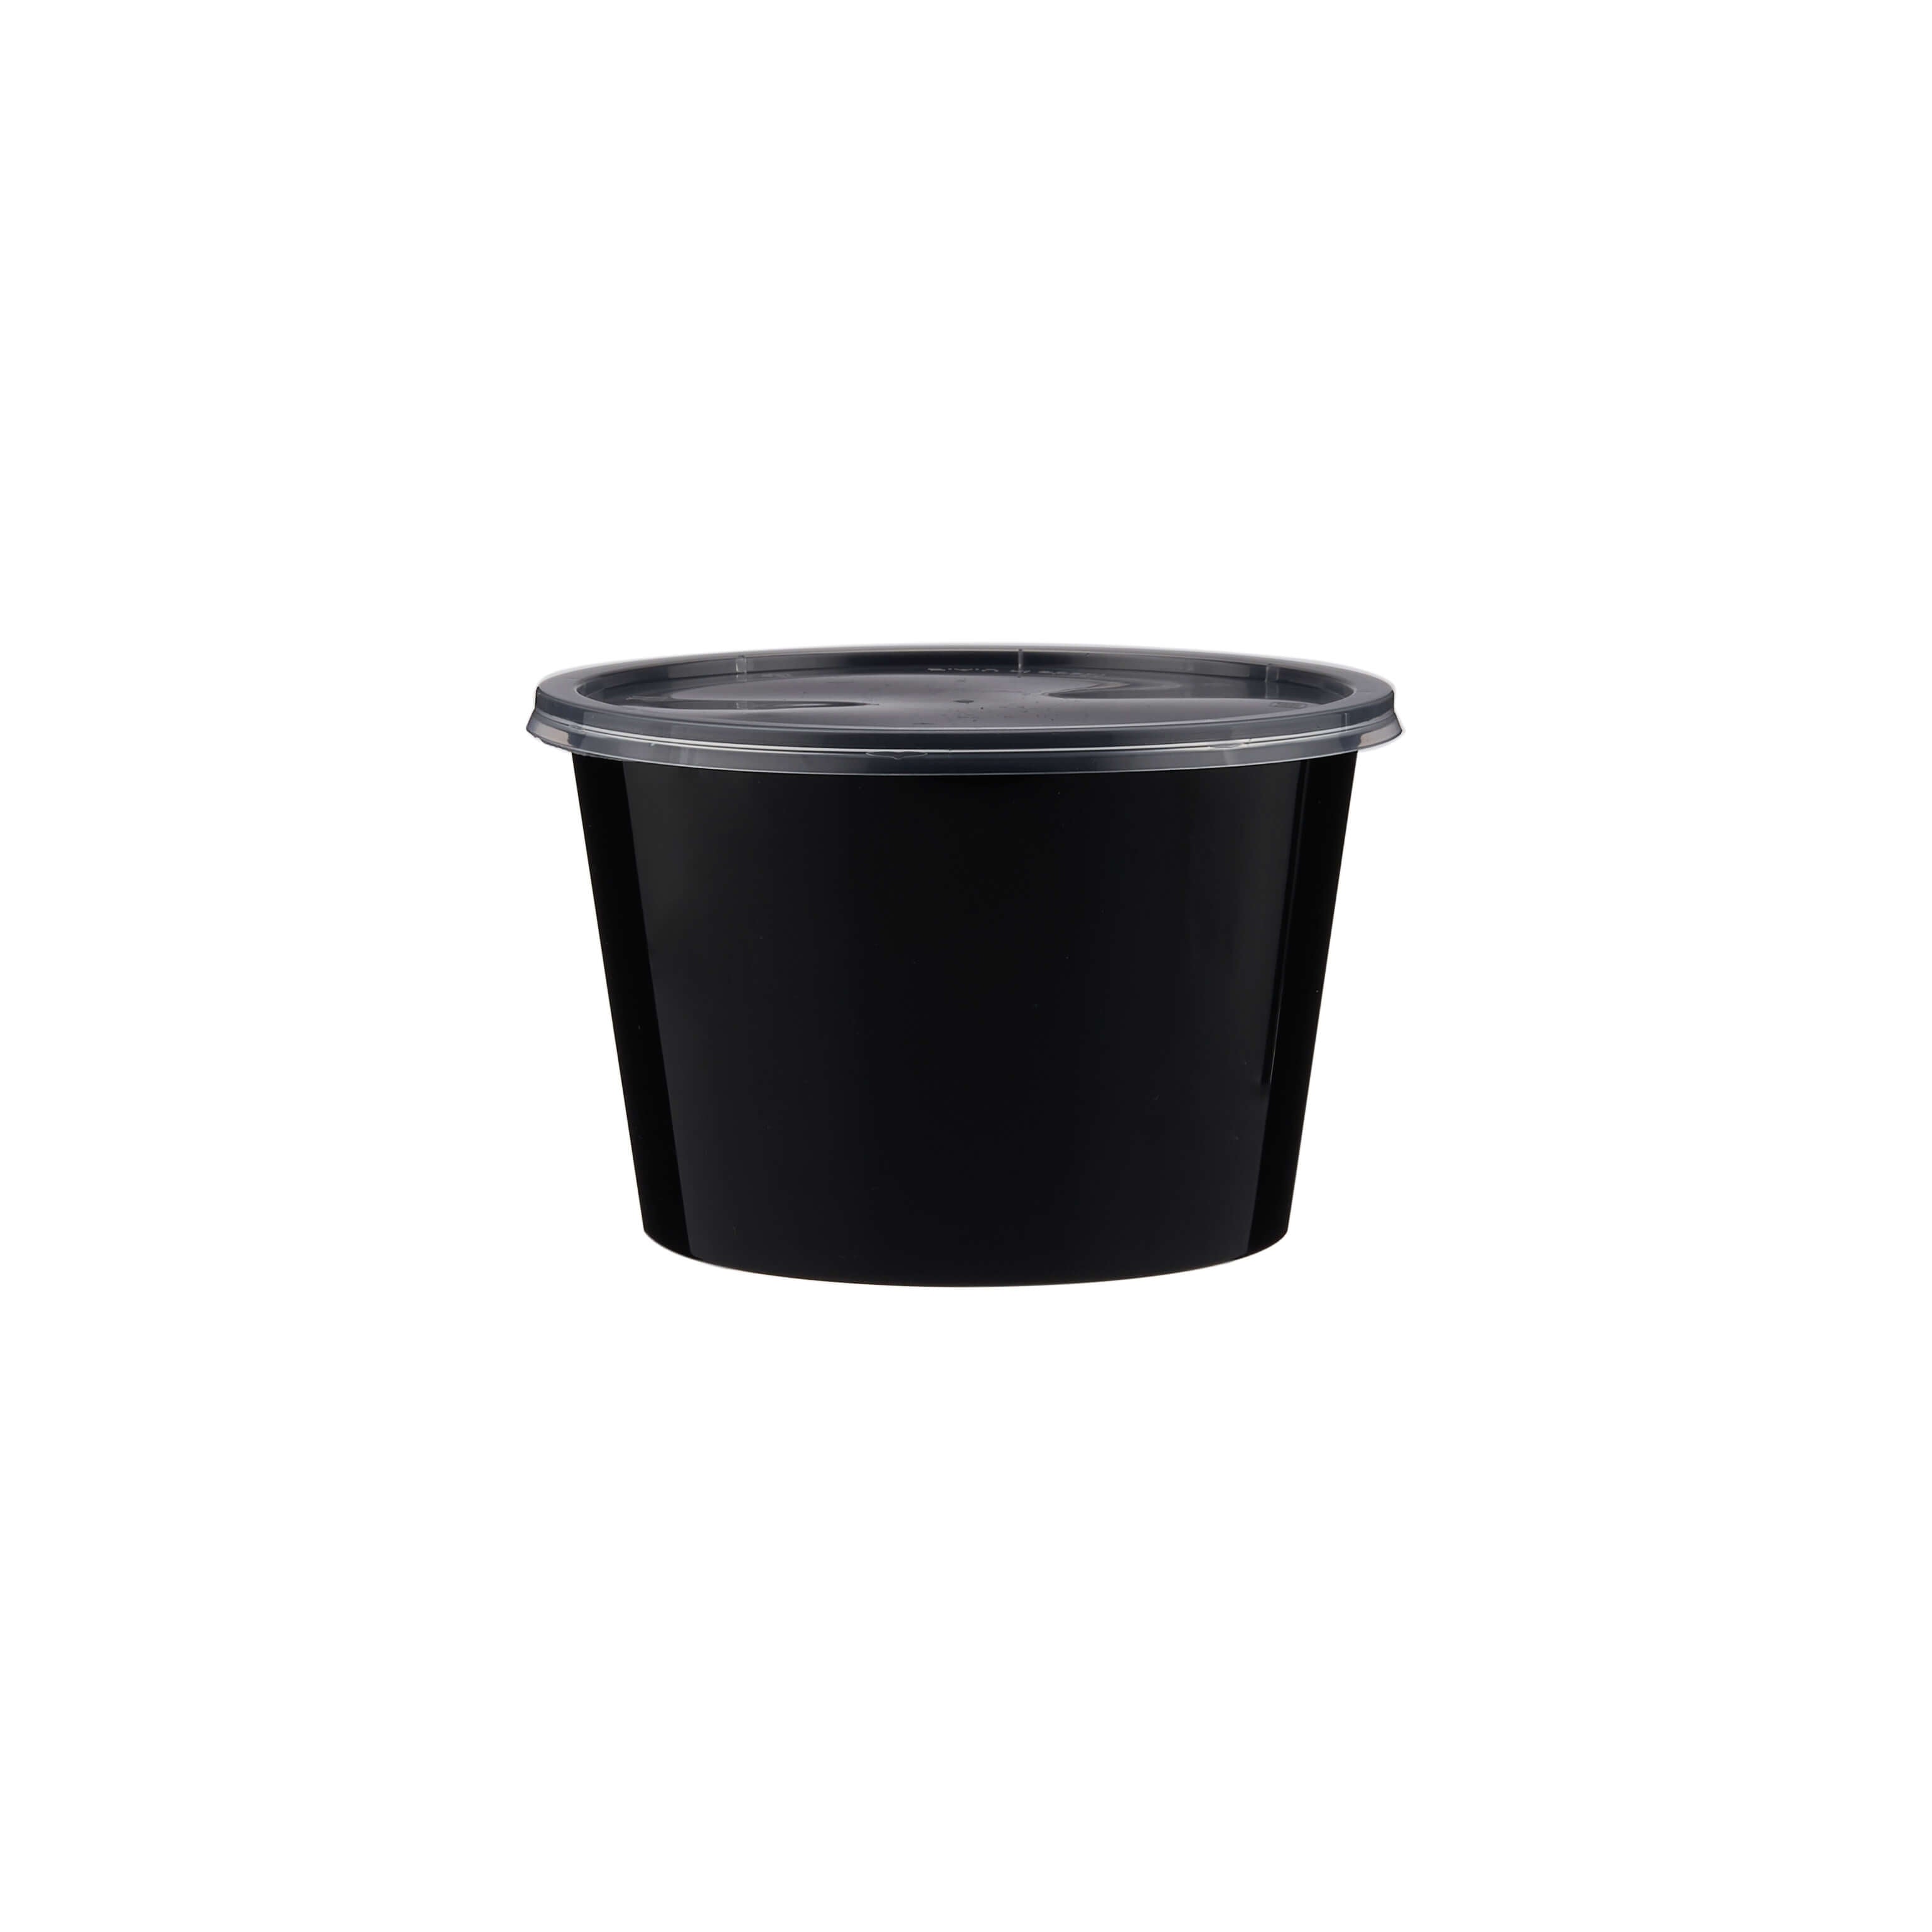 Black Round Microwavable Container 525ml - Hotpack Global